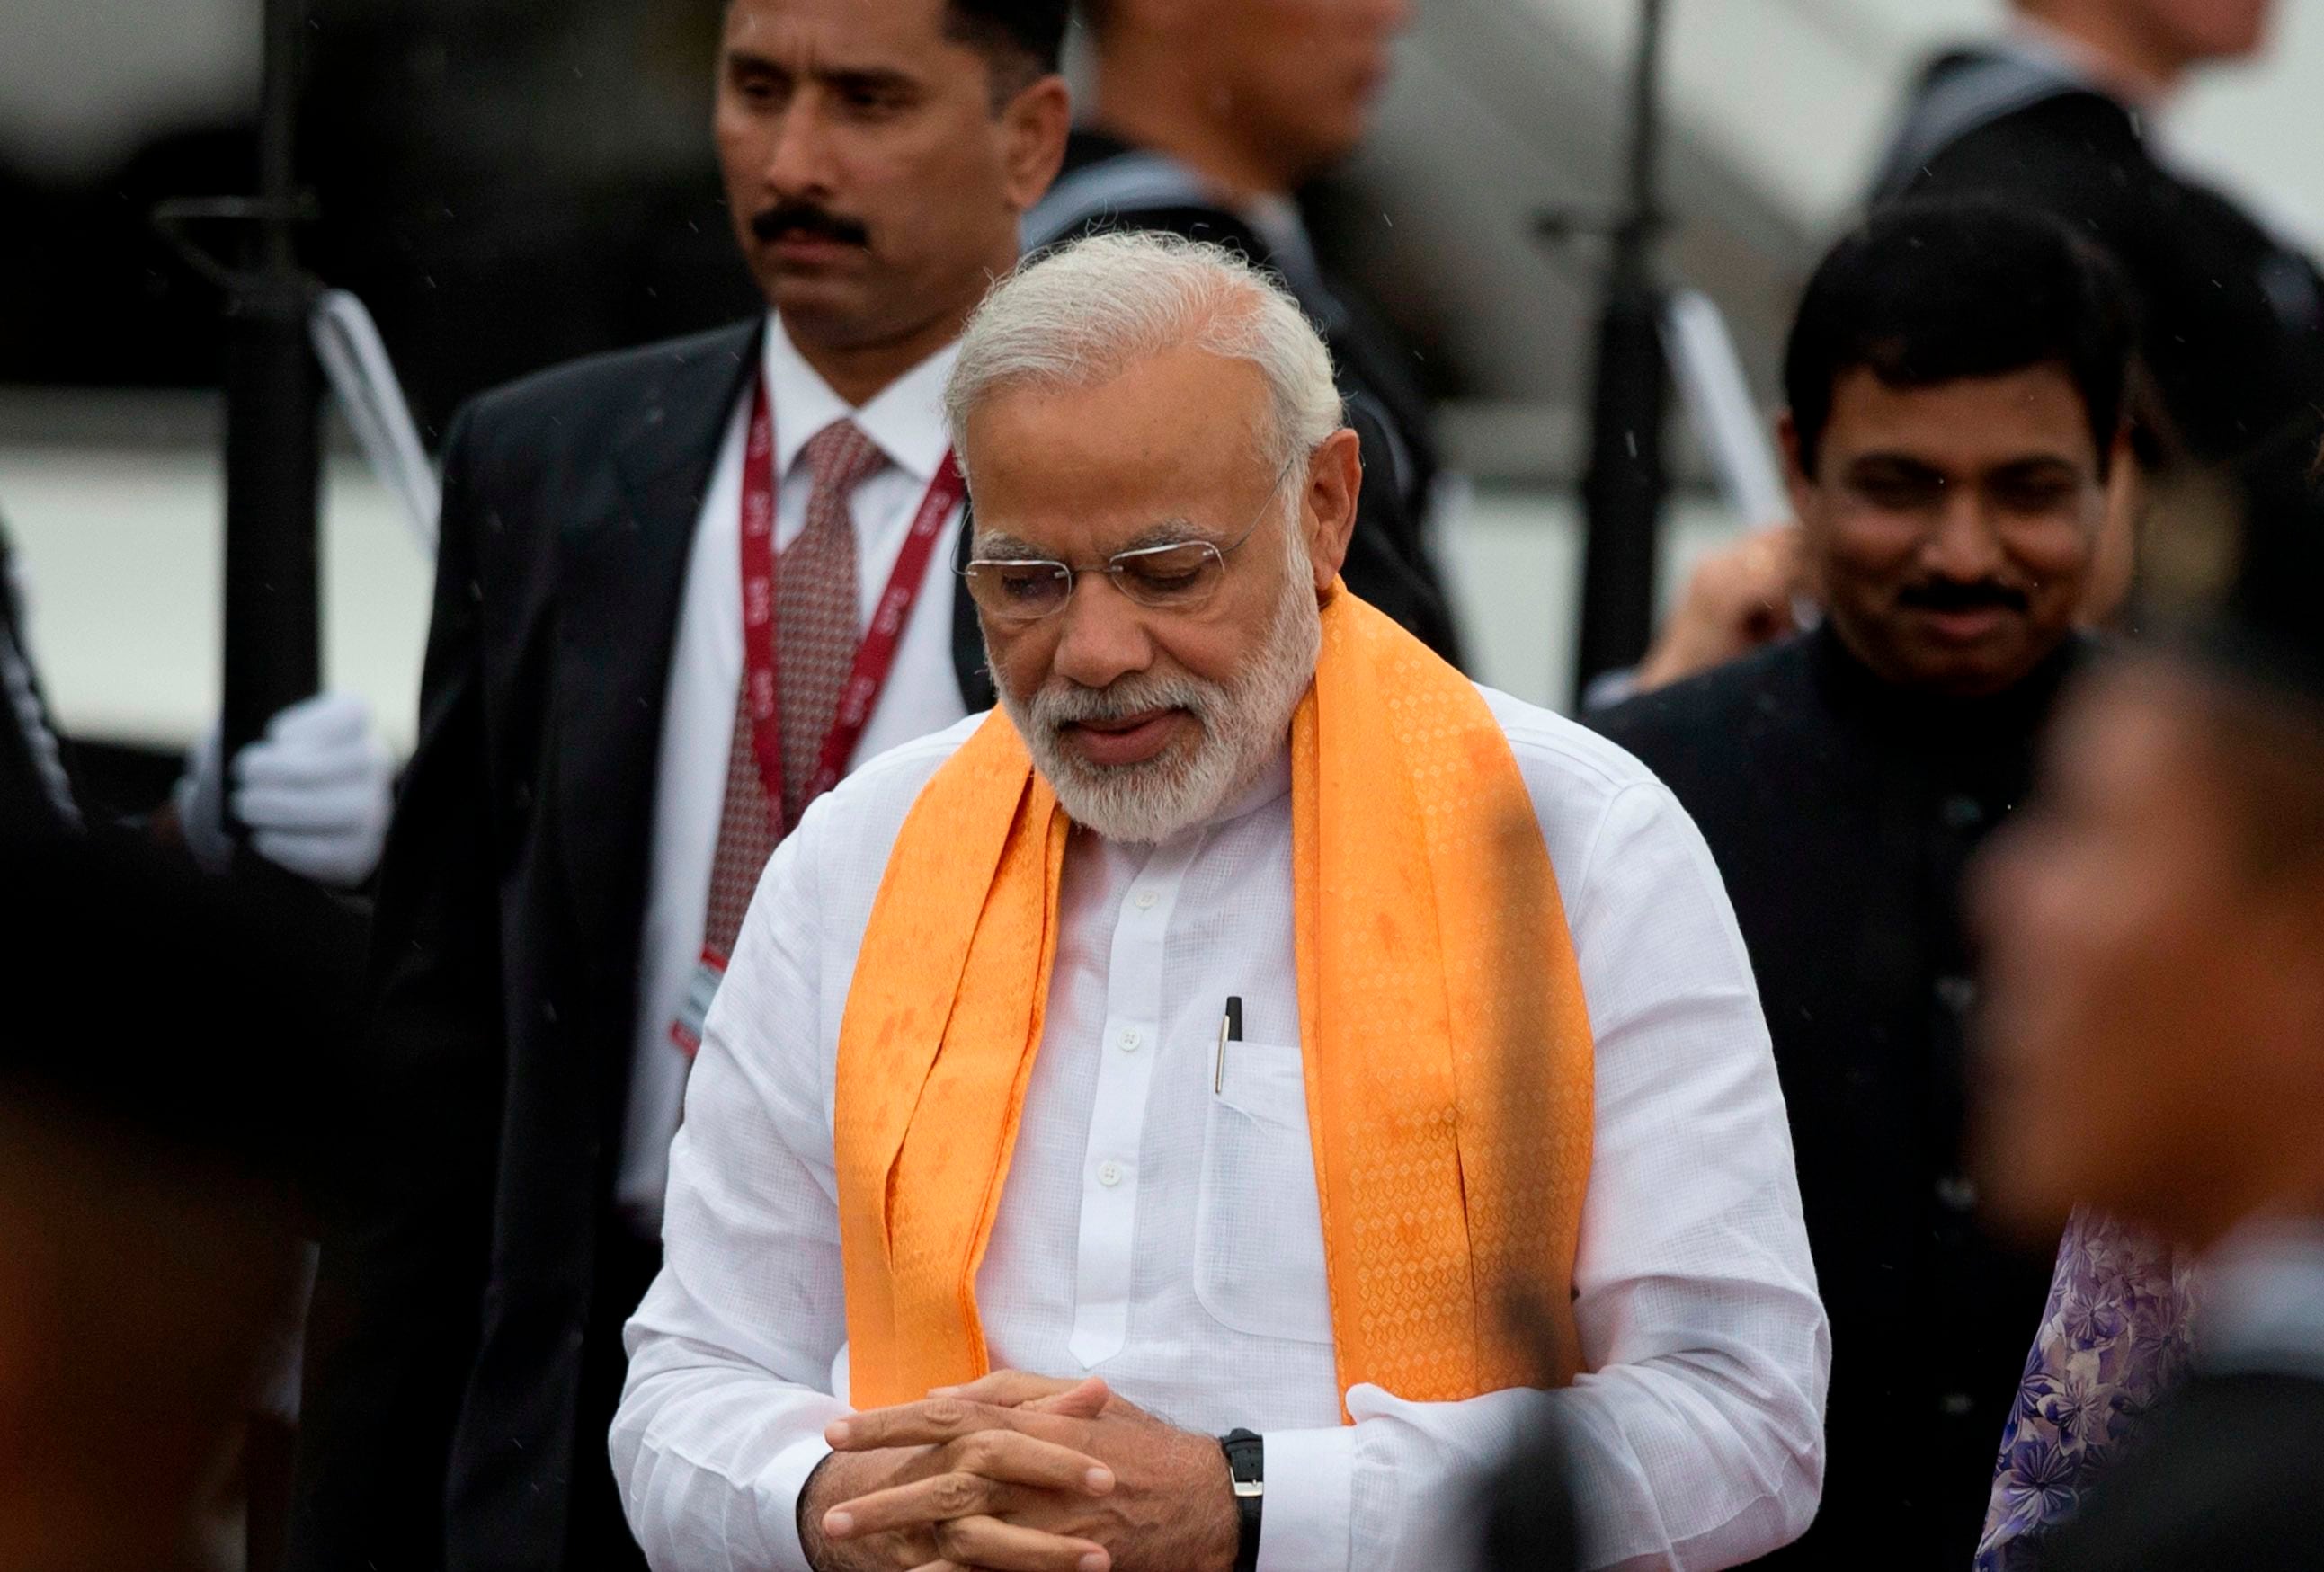 Indian Prime Minister Narendra Modi   arrives to Benito Juarez International Airport in Mexico City, Wednesday, June 8, 2016. Narendra Modi is in Mexico for a few hours  and will meet with Mexico's President Enrique Pena Nieto.  (AP Photo/Eduardo Verdugo)                                                                                                                                                                